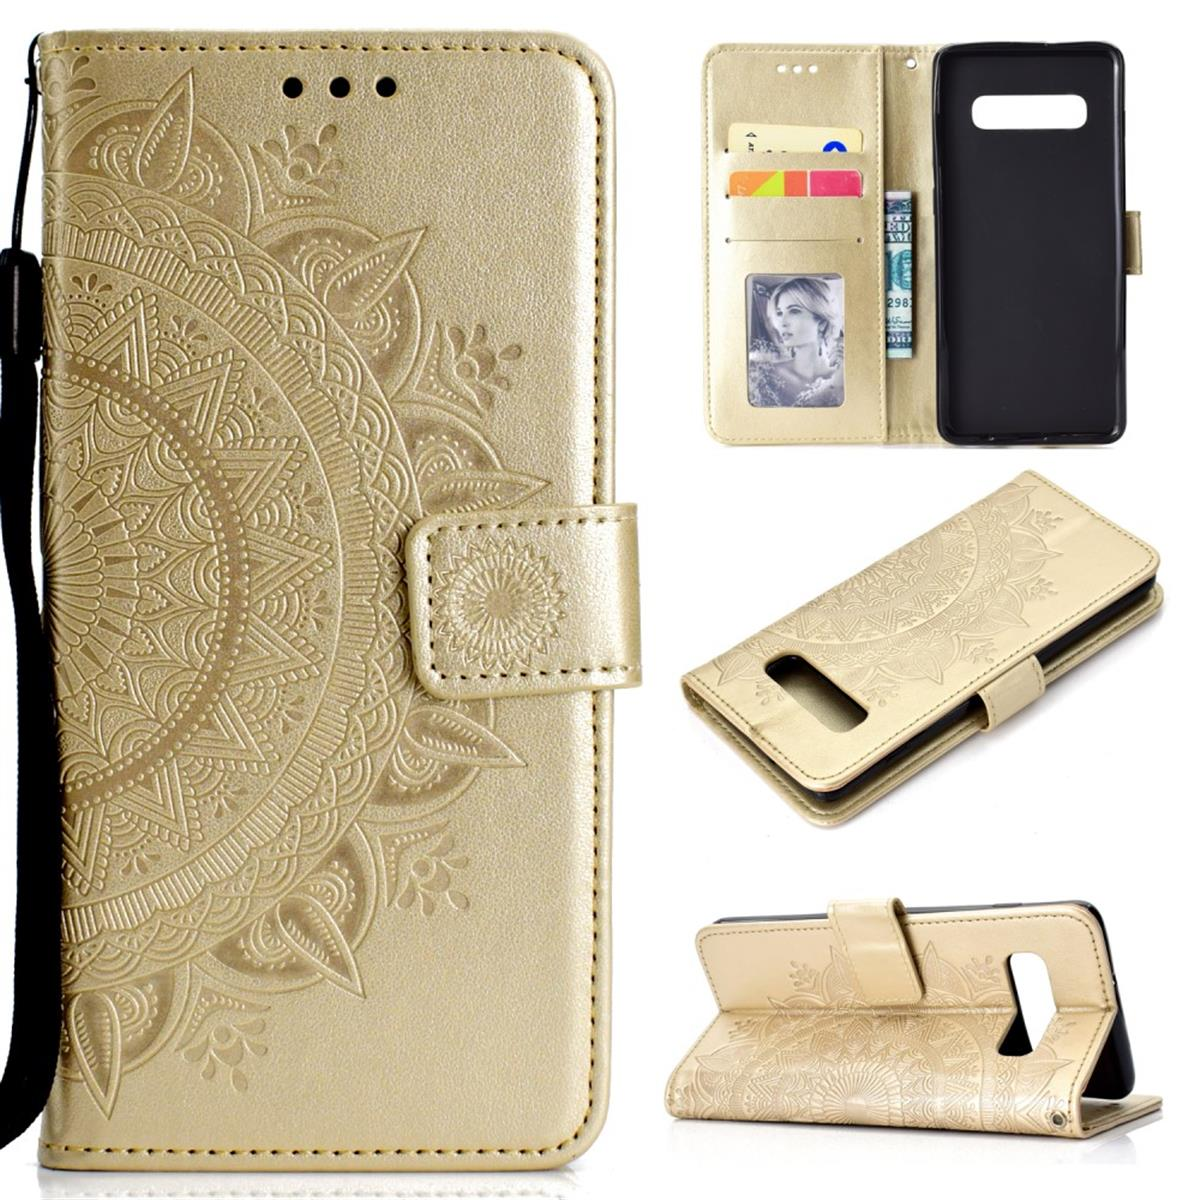 COVERKINGZ Klapphülle mit Mandala Gold Muster, Samsung, Bookcover, Galaxy S10